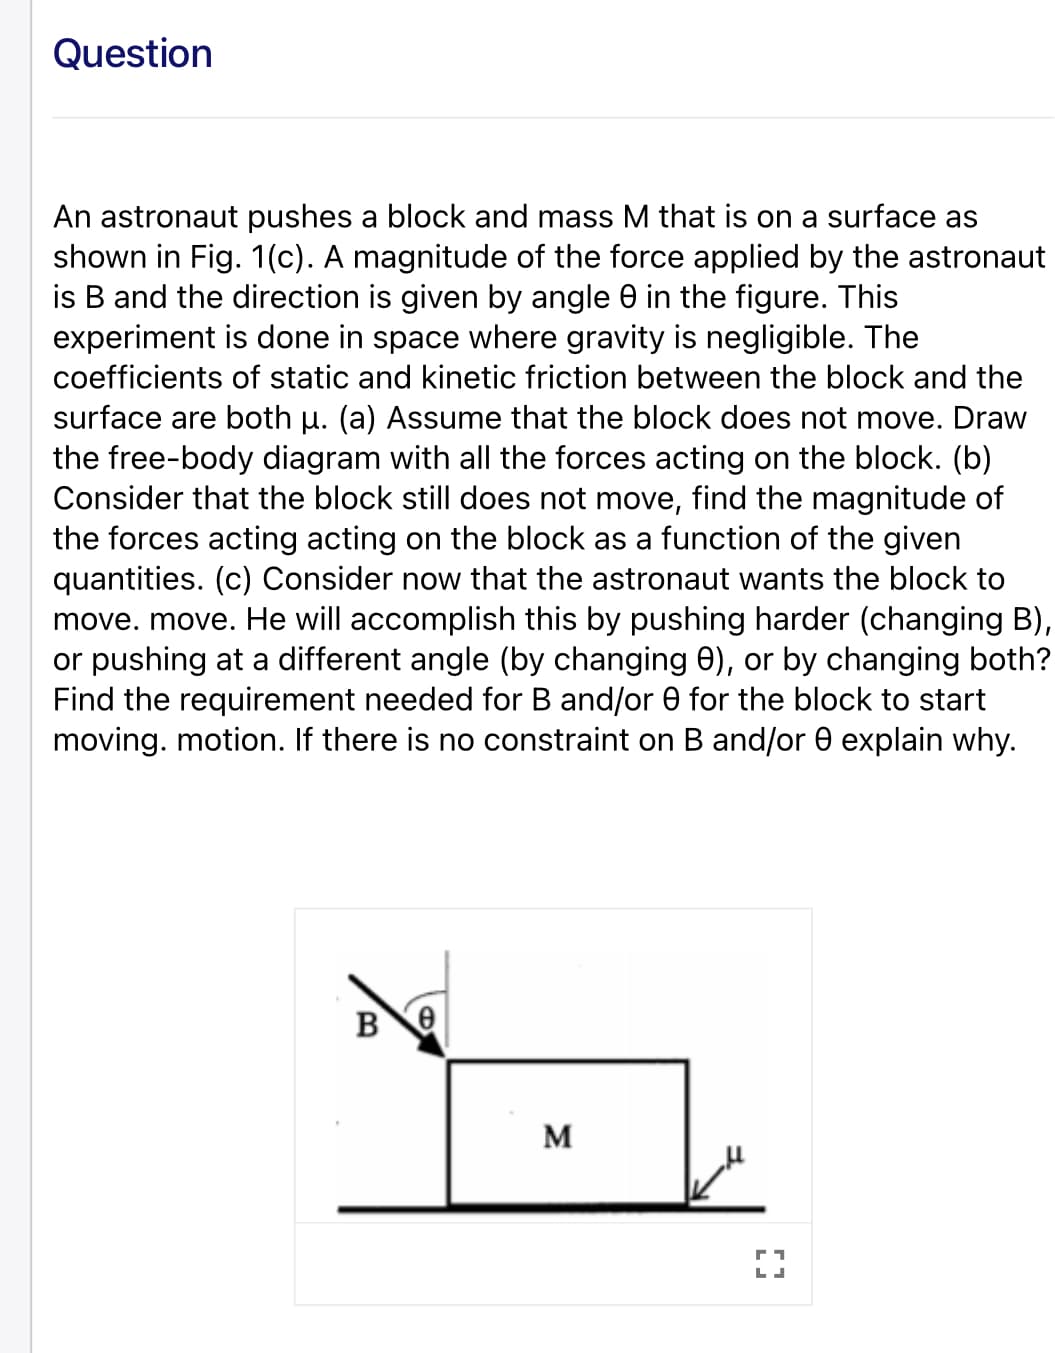 Question
An astronaut pushes a block and mass M that is on a surface as
shown in Fig. 1(c). A magnitude of the force applied by the astronaut
is B and the direction is given by angle 0 in the figure. This
experiment is done in space where gravity is negligible. The
coefficients of static and kinetic friction between the block and the
surface are both u. (a) Assume that the block does not move. Draw
the free-body diagram with all the forces acting on the block. (b)
Consider that the block still does not move, find the magnitude of
the forces acting acting on the block as a function of the given
quantities. (c) Consider now that the astronaut wants the block to
move. move. He will accomplish this by pushing harder (changing B),
or pushing at a different angle (by changing 0), or by changing both?
Find the requirement needed for B and/or 0 for the block to start
moving. motion. If there is no constraint on B and/or 0 explain why.
M
